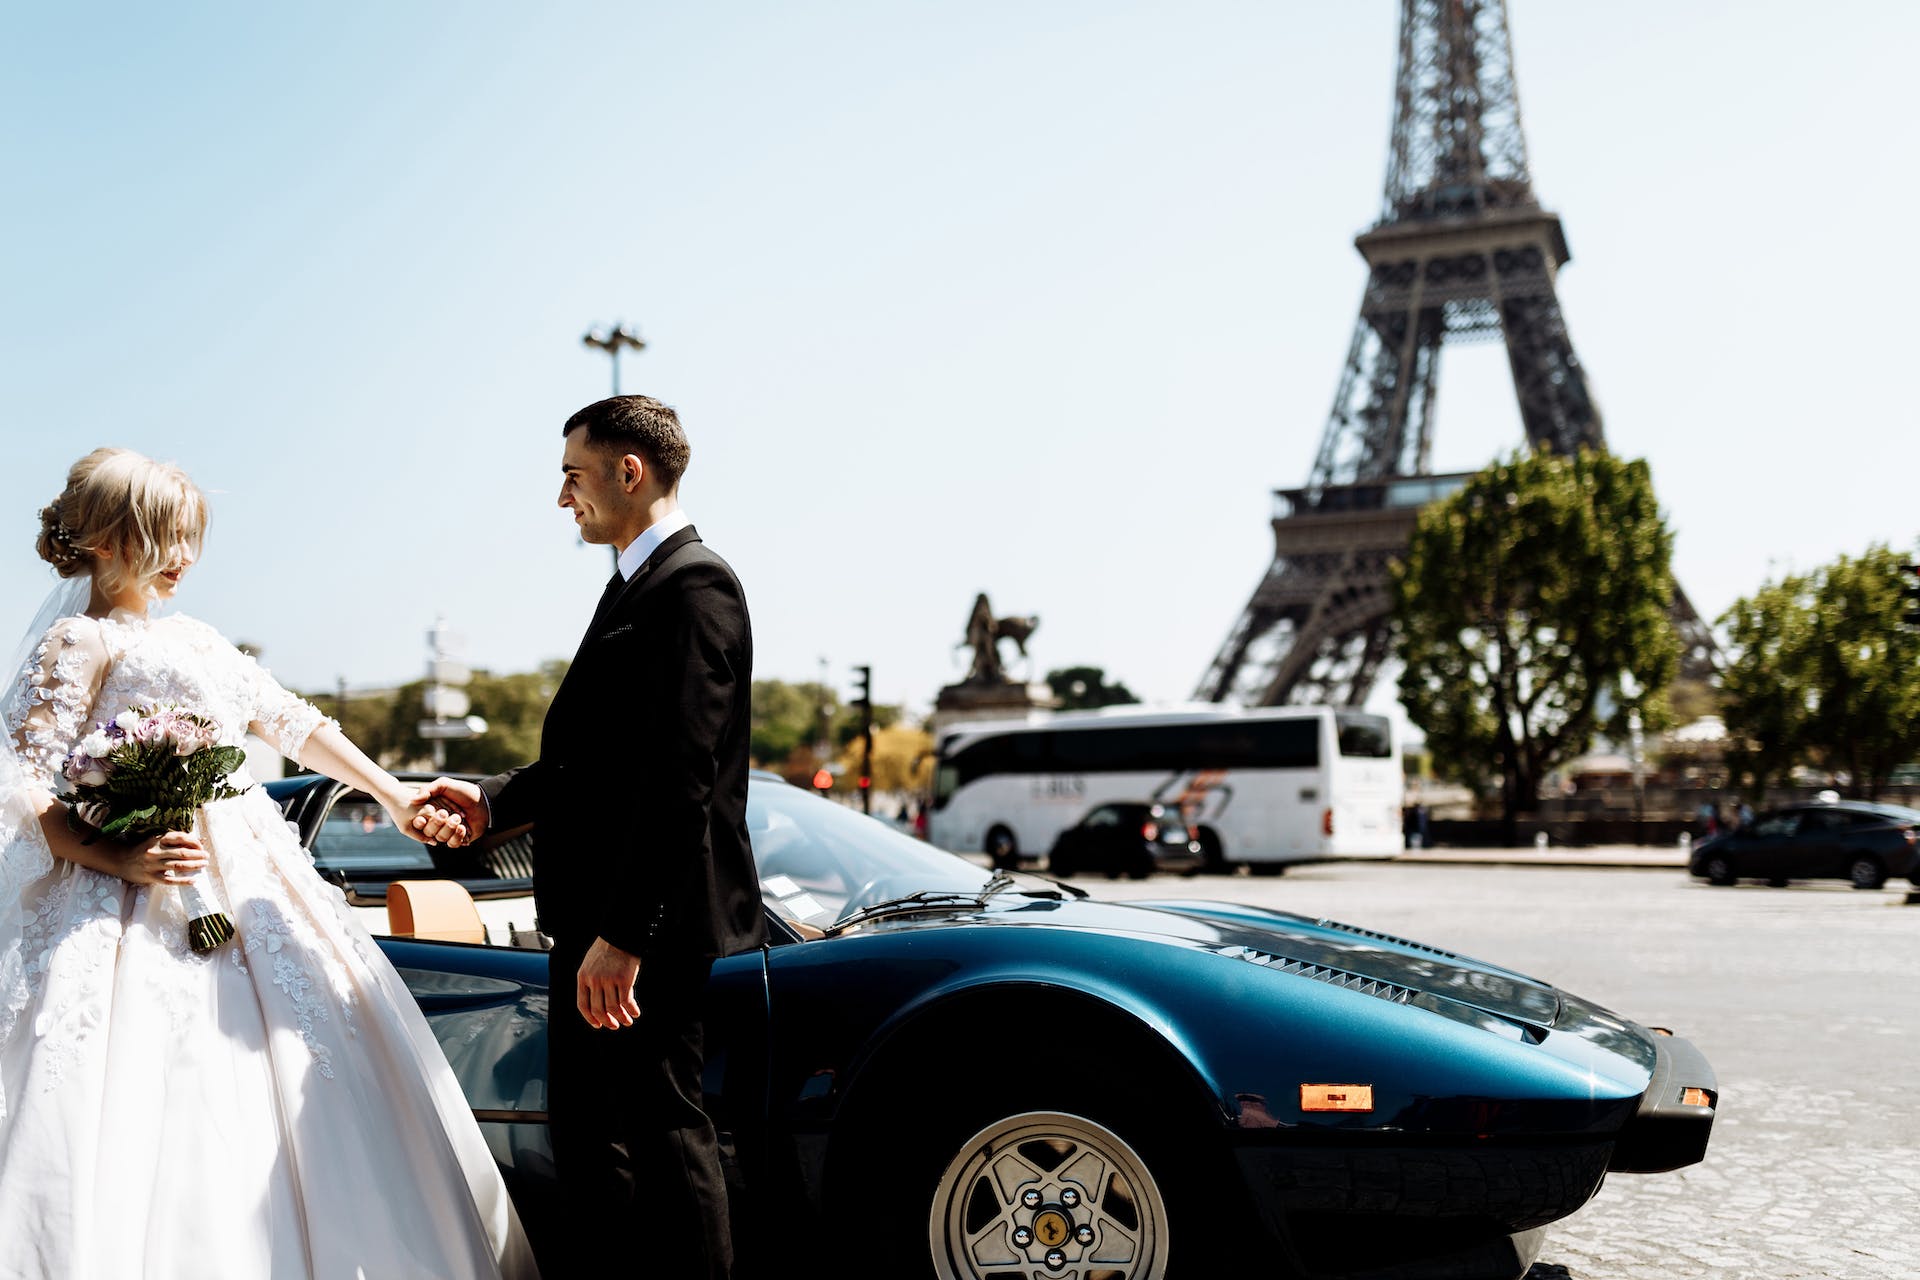 A newlywed couple standing in front of the Eiffel Tower in Paris | Source: Pexels